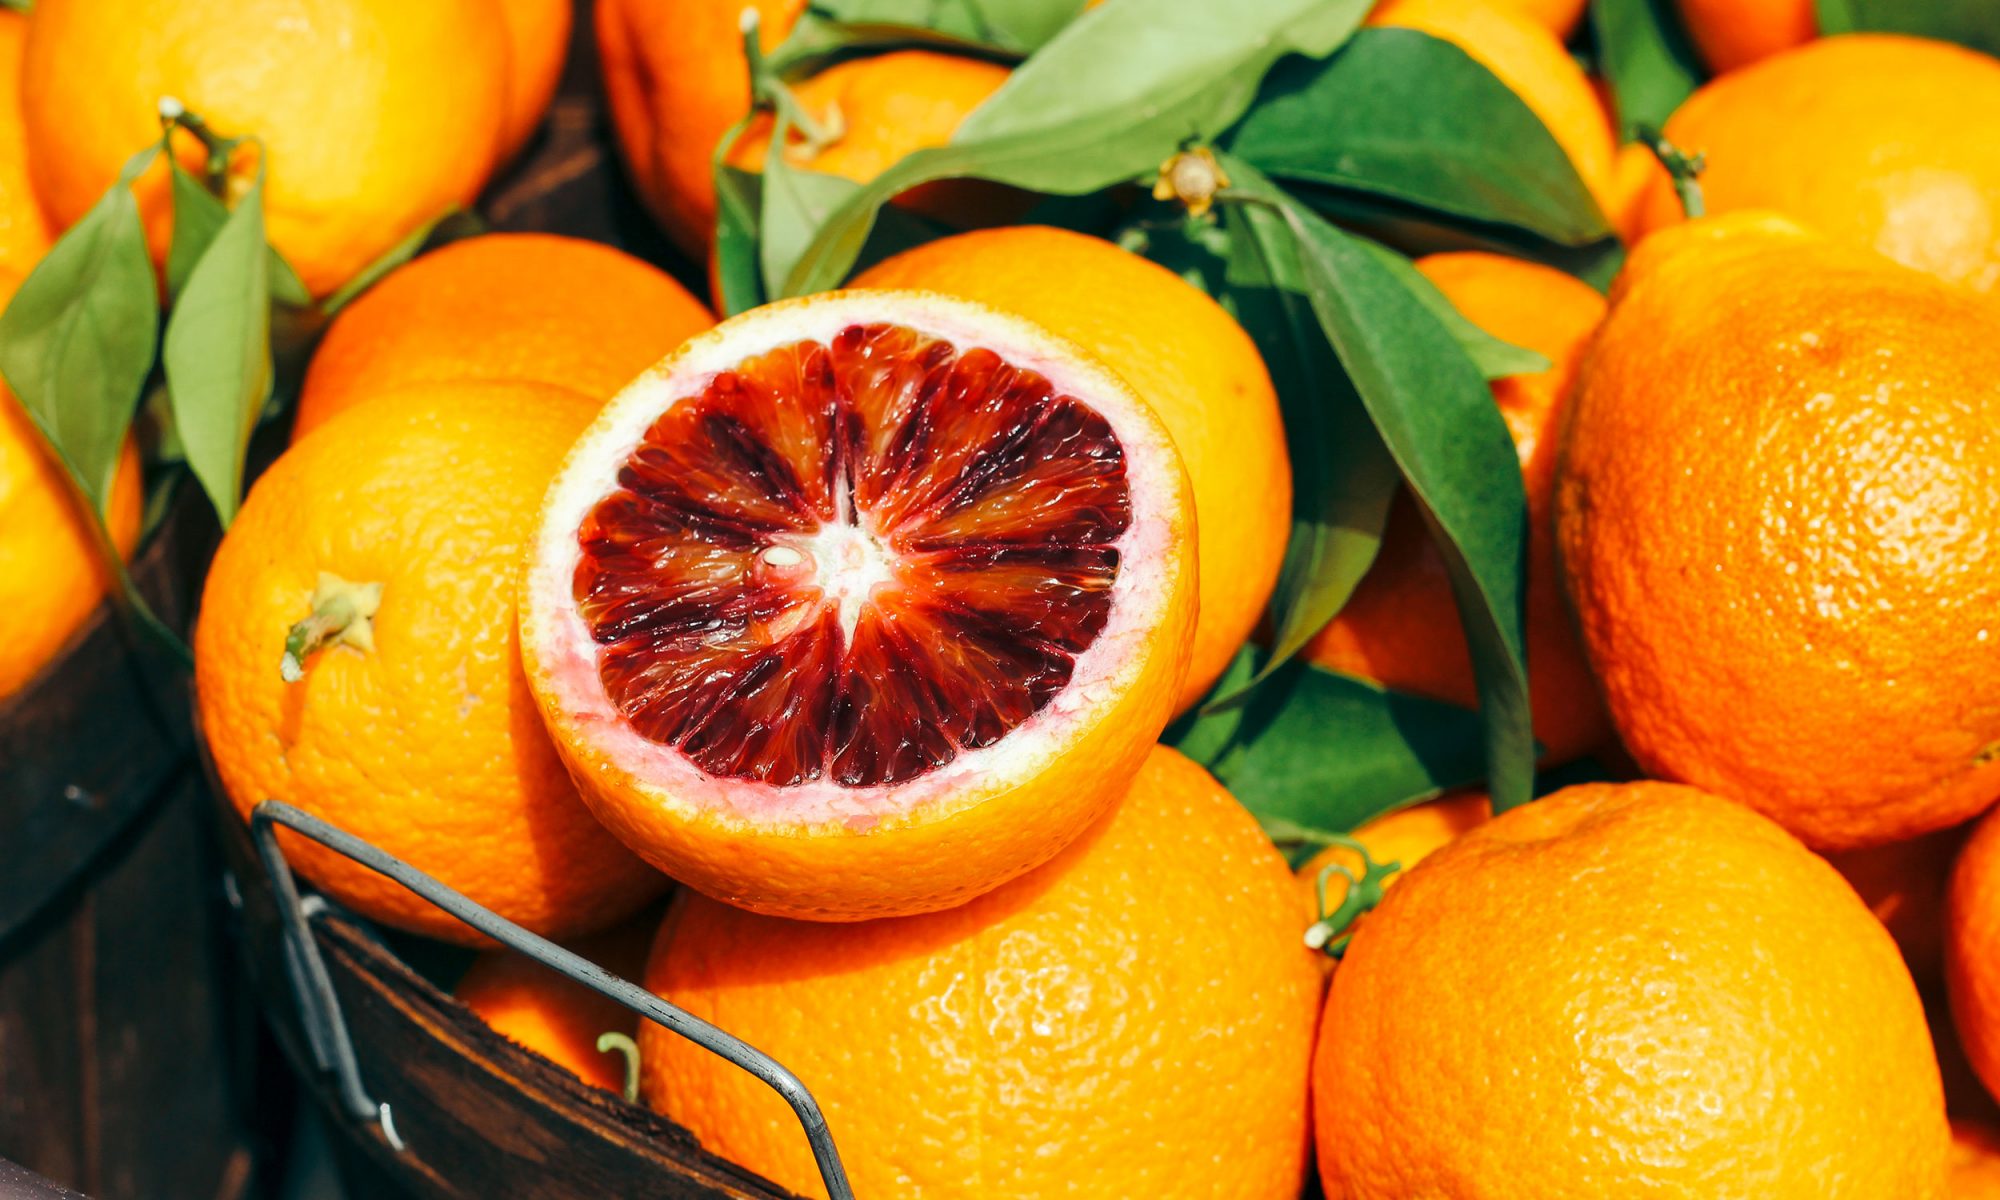 EC: Are Blood Oranges Naturally Red?